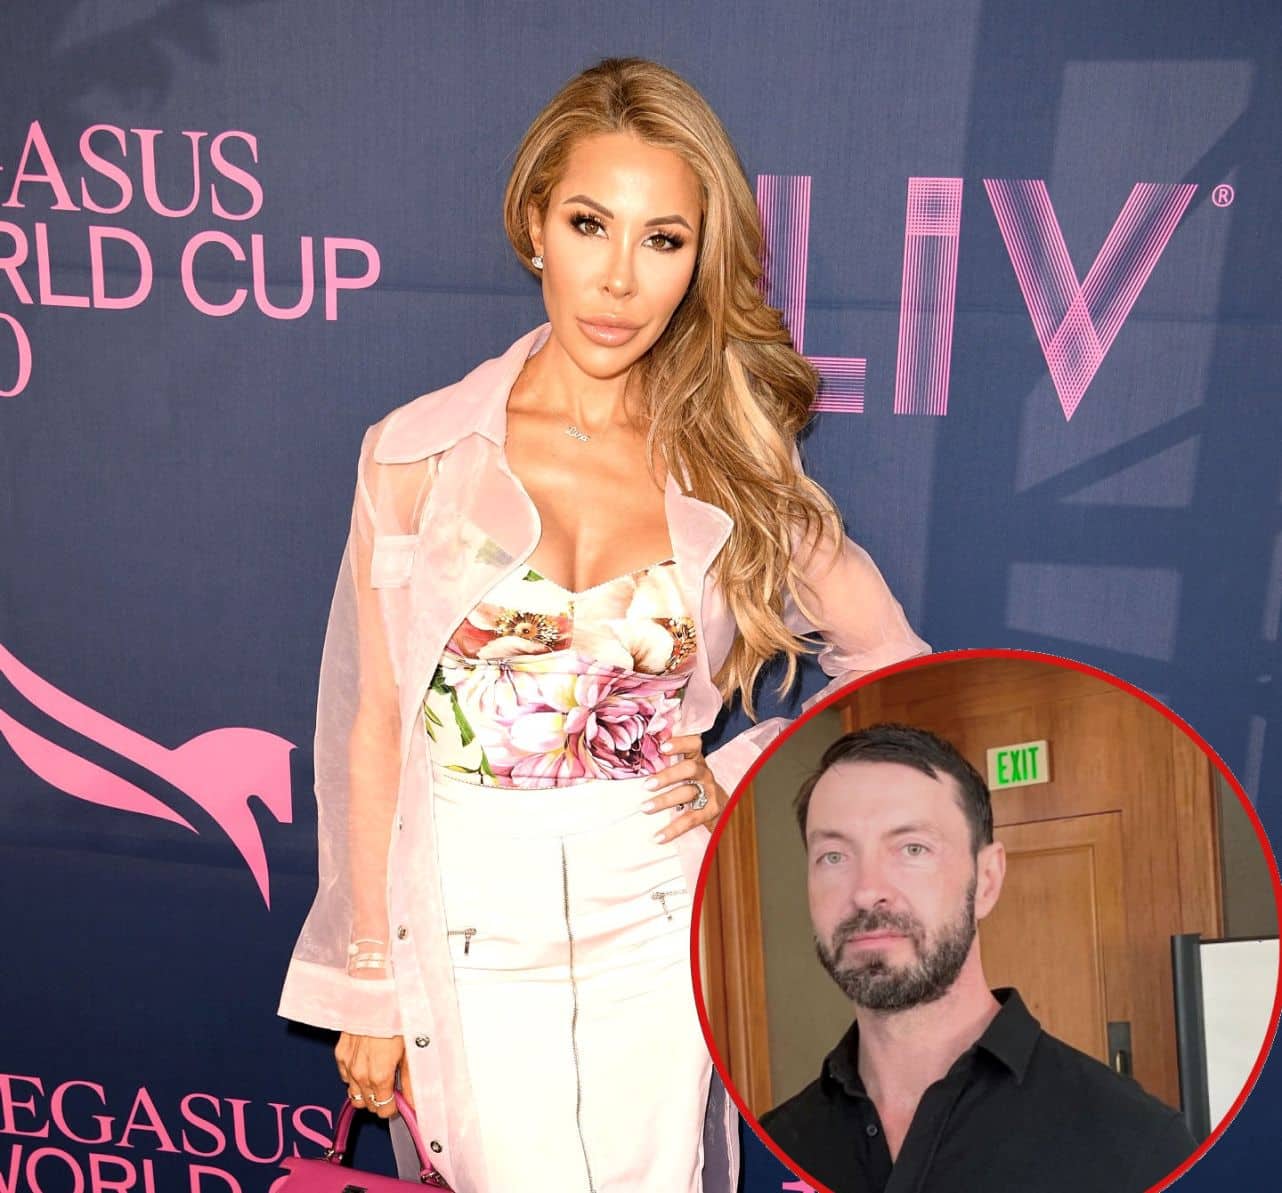 Lisa Hochstein Confirms Relationship With Jody Glidden, Claims Lenny Asked for New Baby 2 Weeks Before Divorce and Teases RHOM Season 5 Reunion